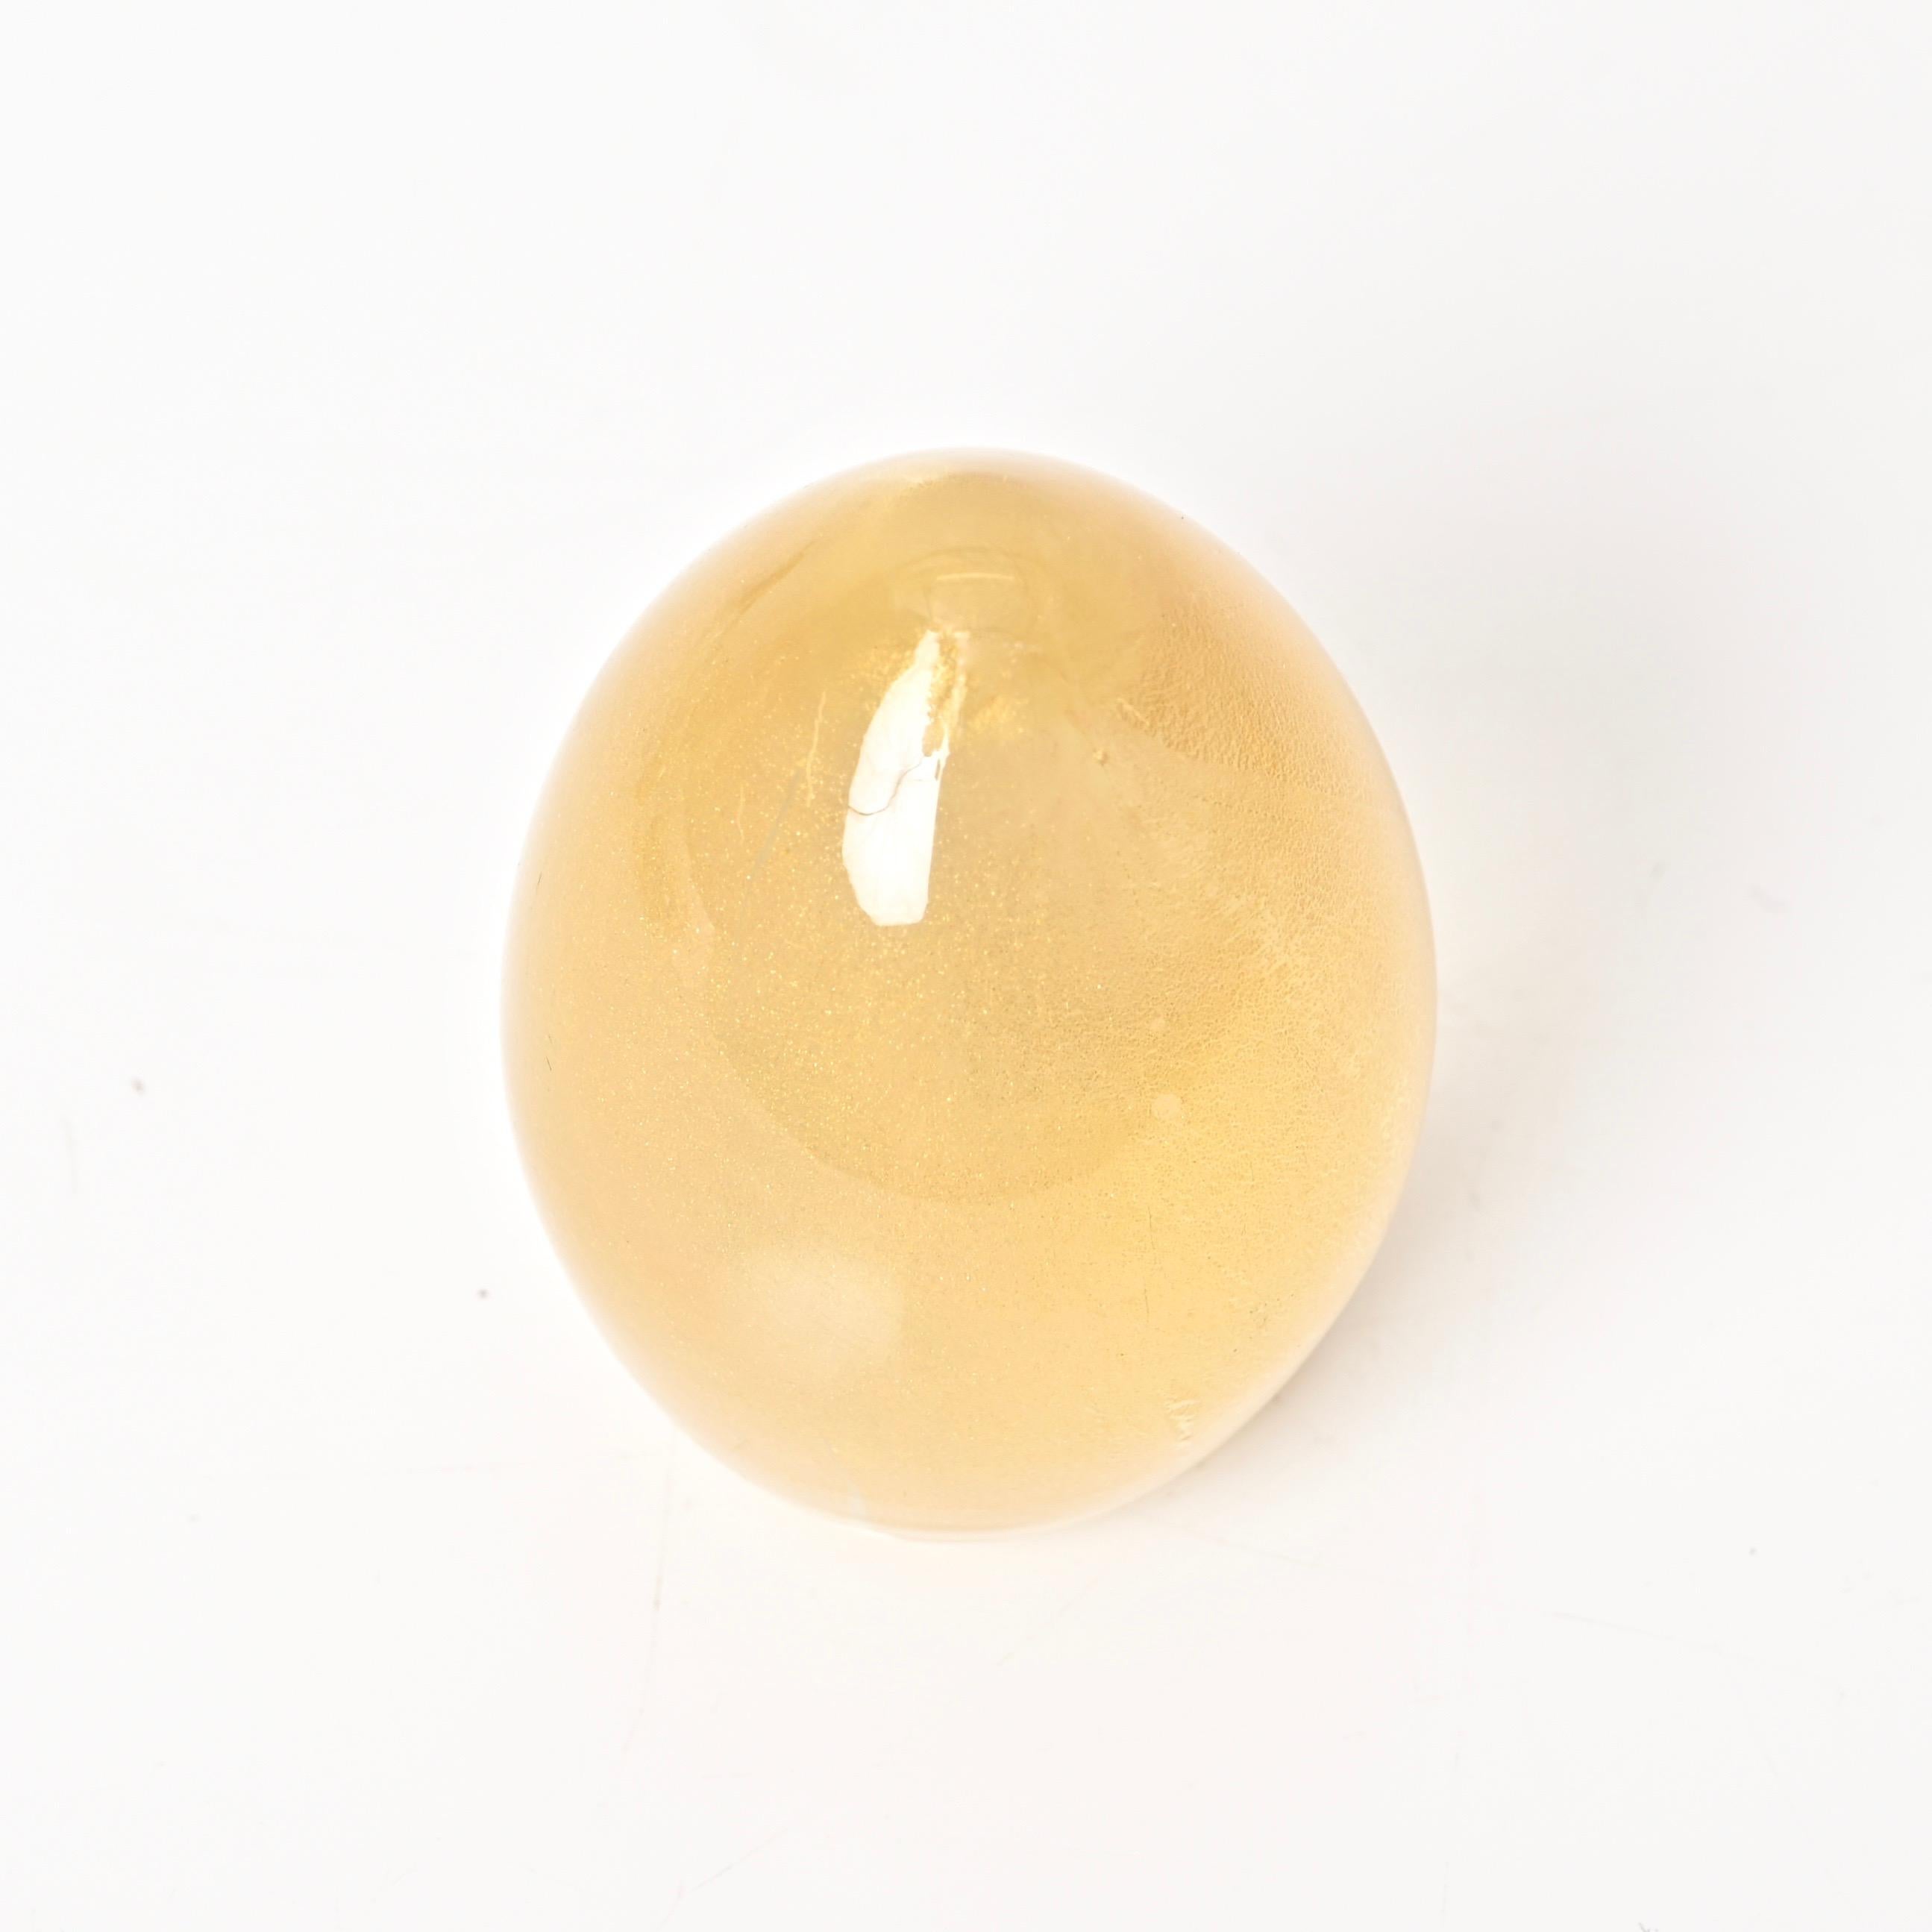 Seguso Murano Egg Paperweight in Murano Glass with Gold Dust, Italy 1950s For Sale 1